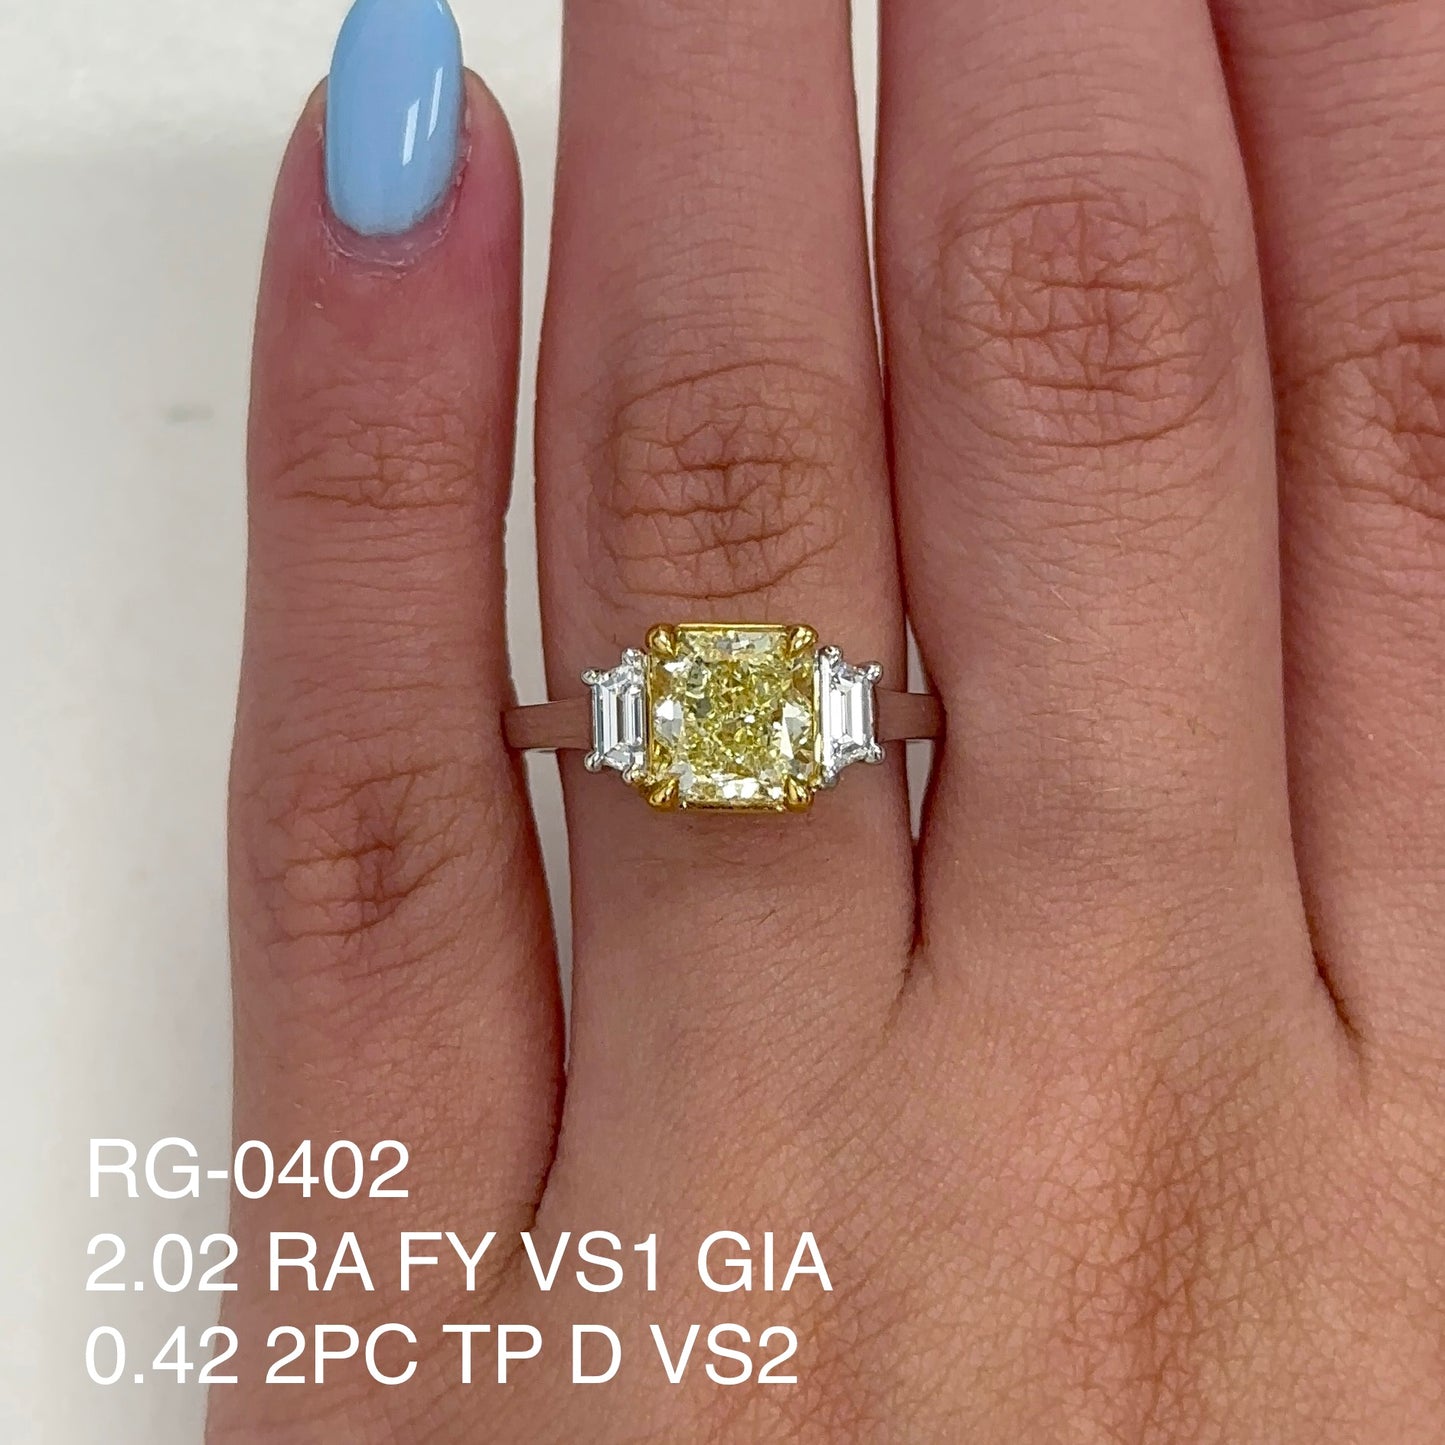 2.86 Tcw Radiant Cut Fancy Yellow Natural Diamond GIA Engagement Ring